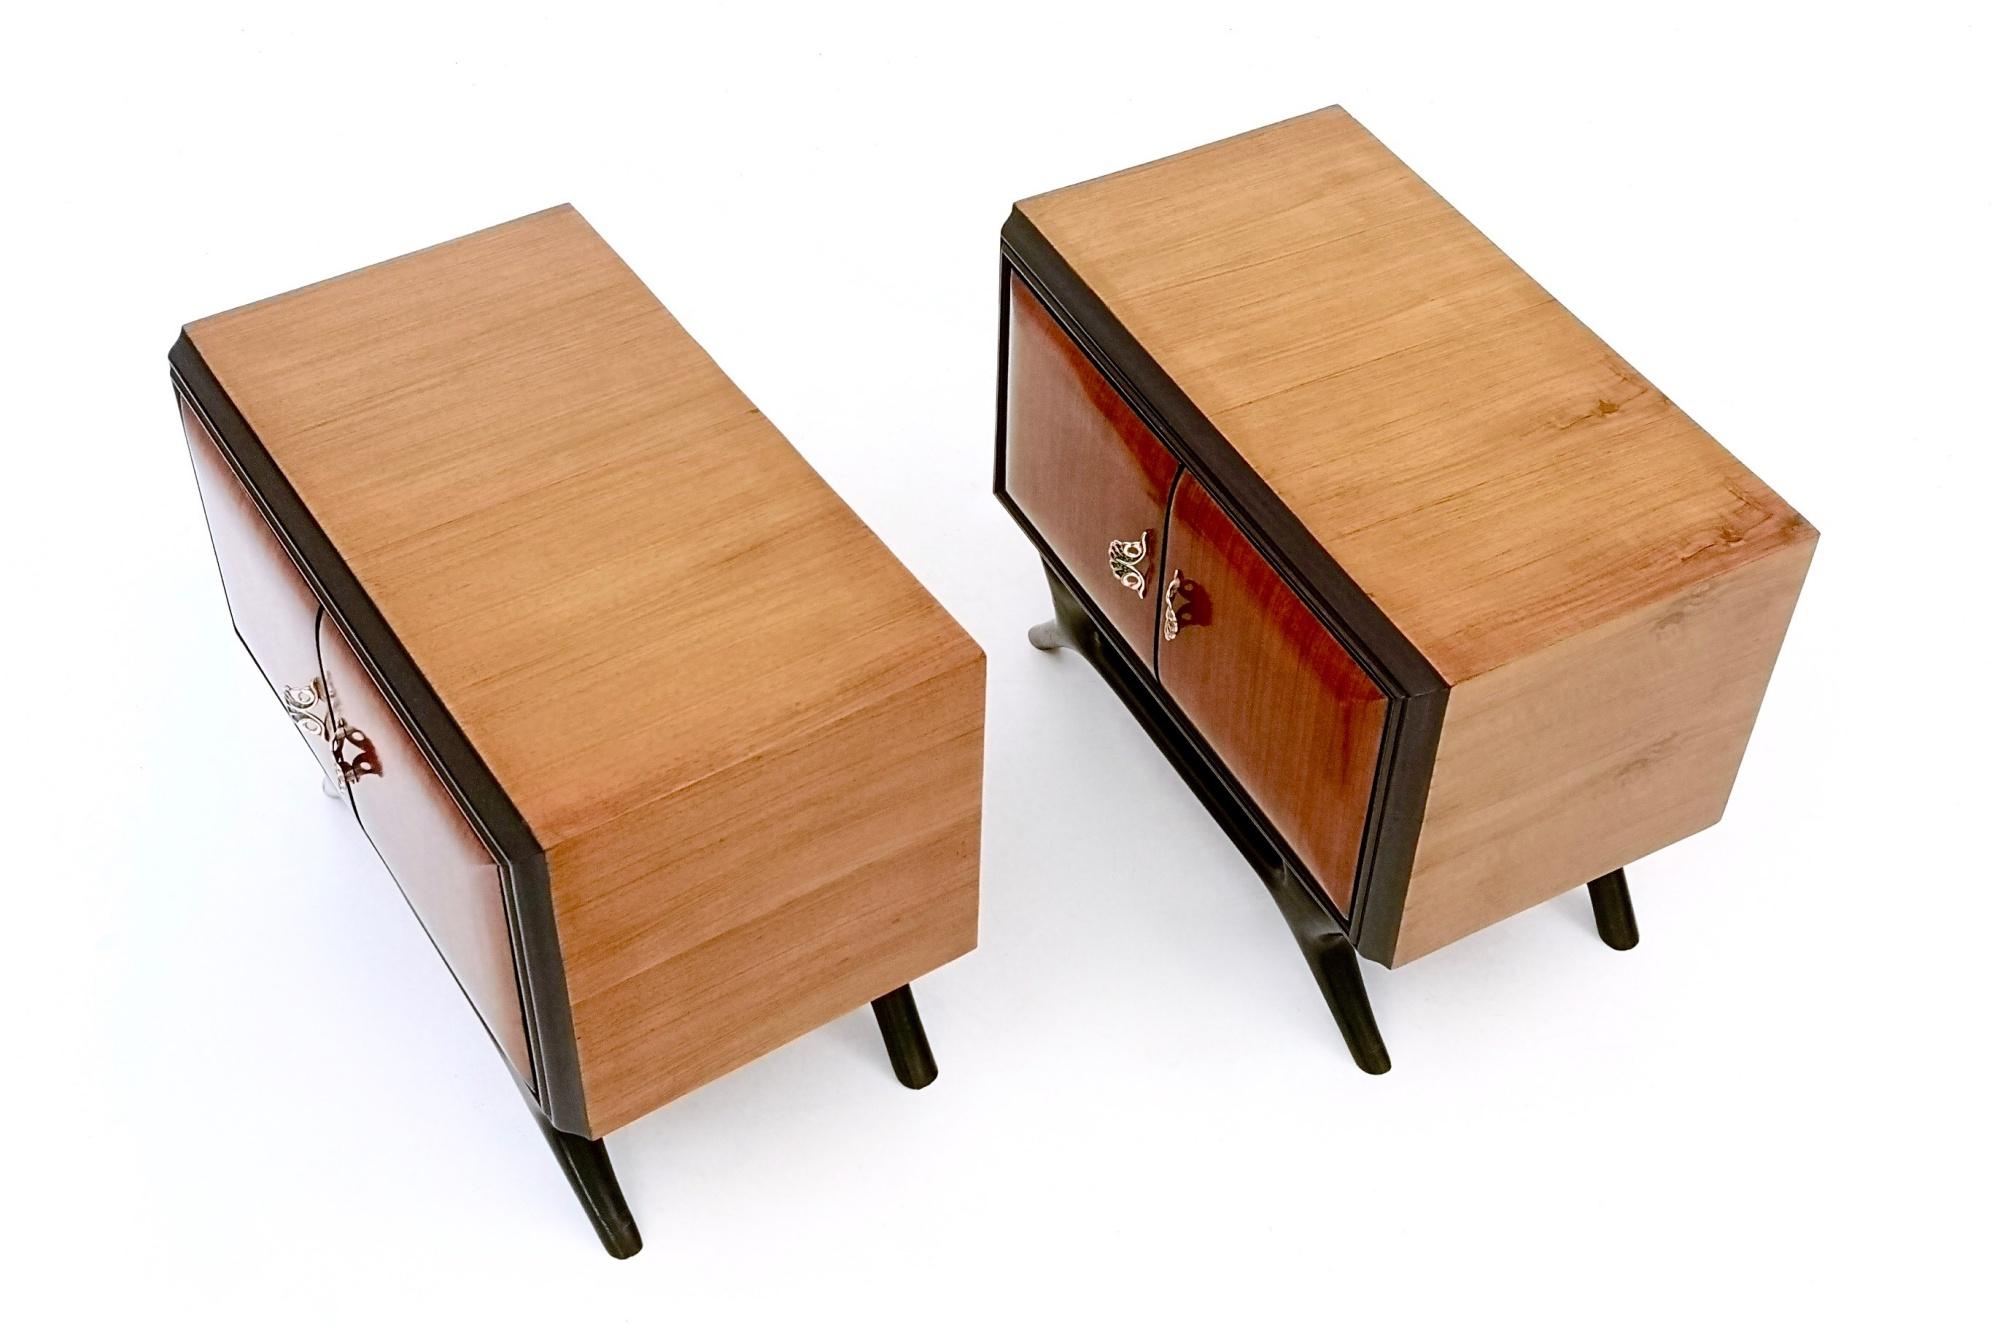 Mid-20th Century Pair of Vintage Walnut and Ebonized Wood Nightstands with Brass Handles, Italy